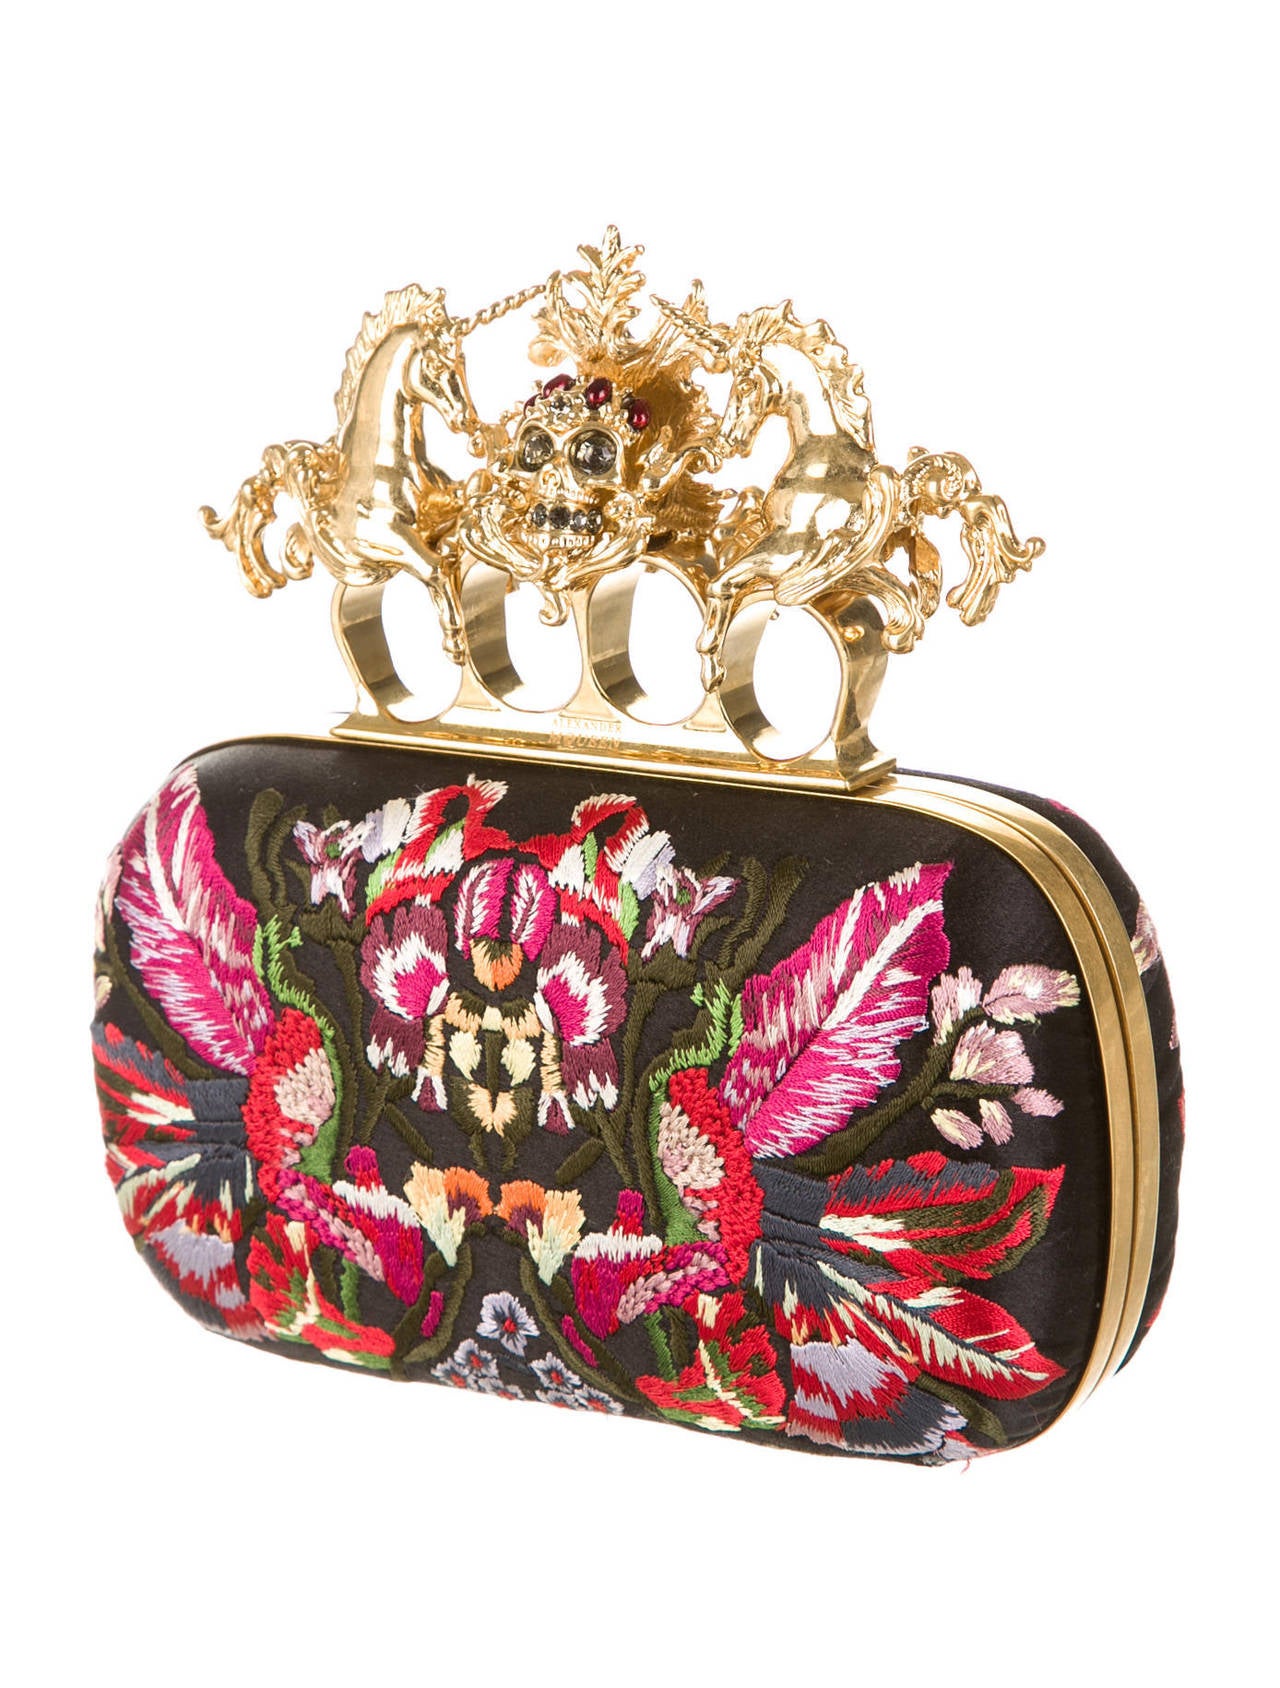 Very rare Alexander McQueen black satin knuckle box clutch with embroidered print throughout, gold-tone frame and hardware, black leather lining, and top gold-tone knuckle clasp closure featuring unicorn and skull embellishments. It is from the